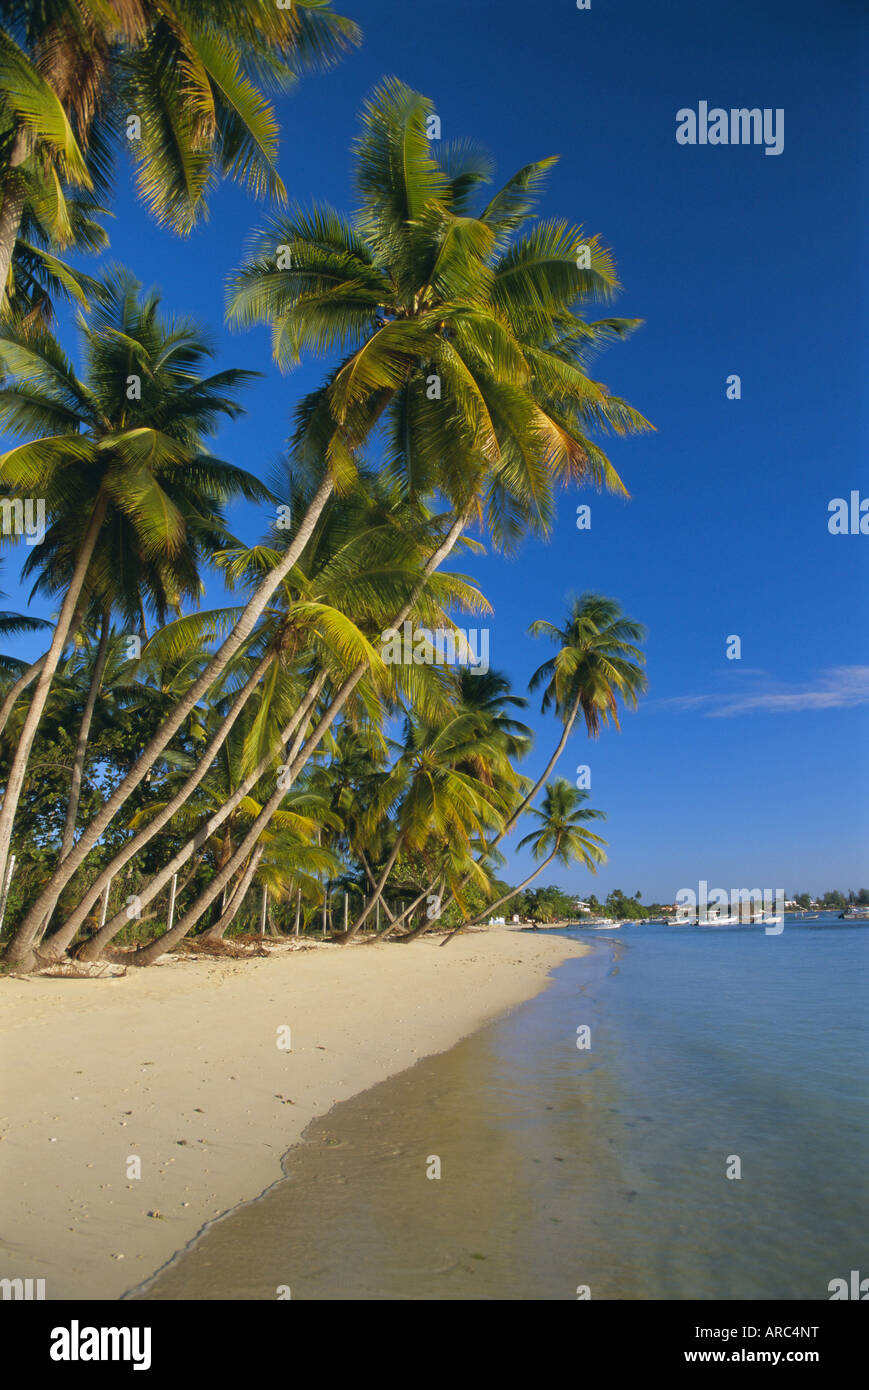 Palm trees and beach, Pigeon Point, Tobago, Trinidad and Tobago, West ...